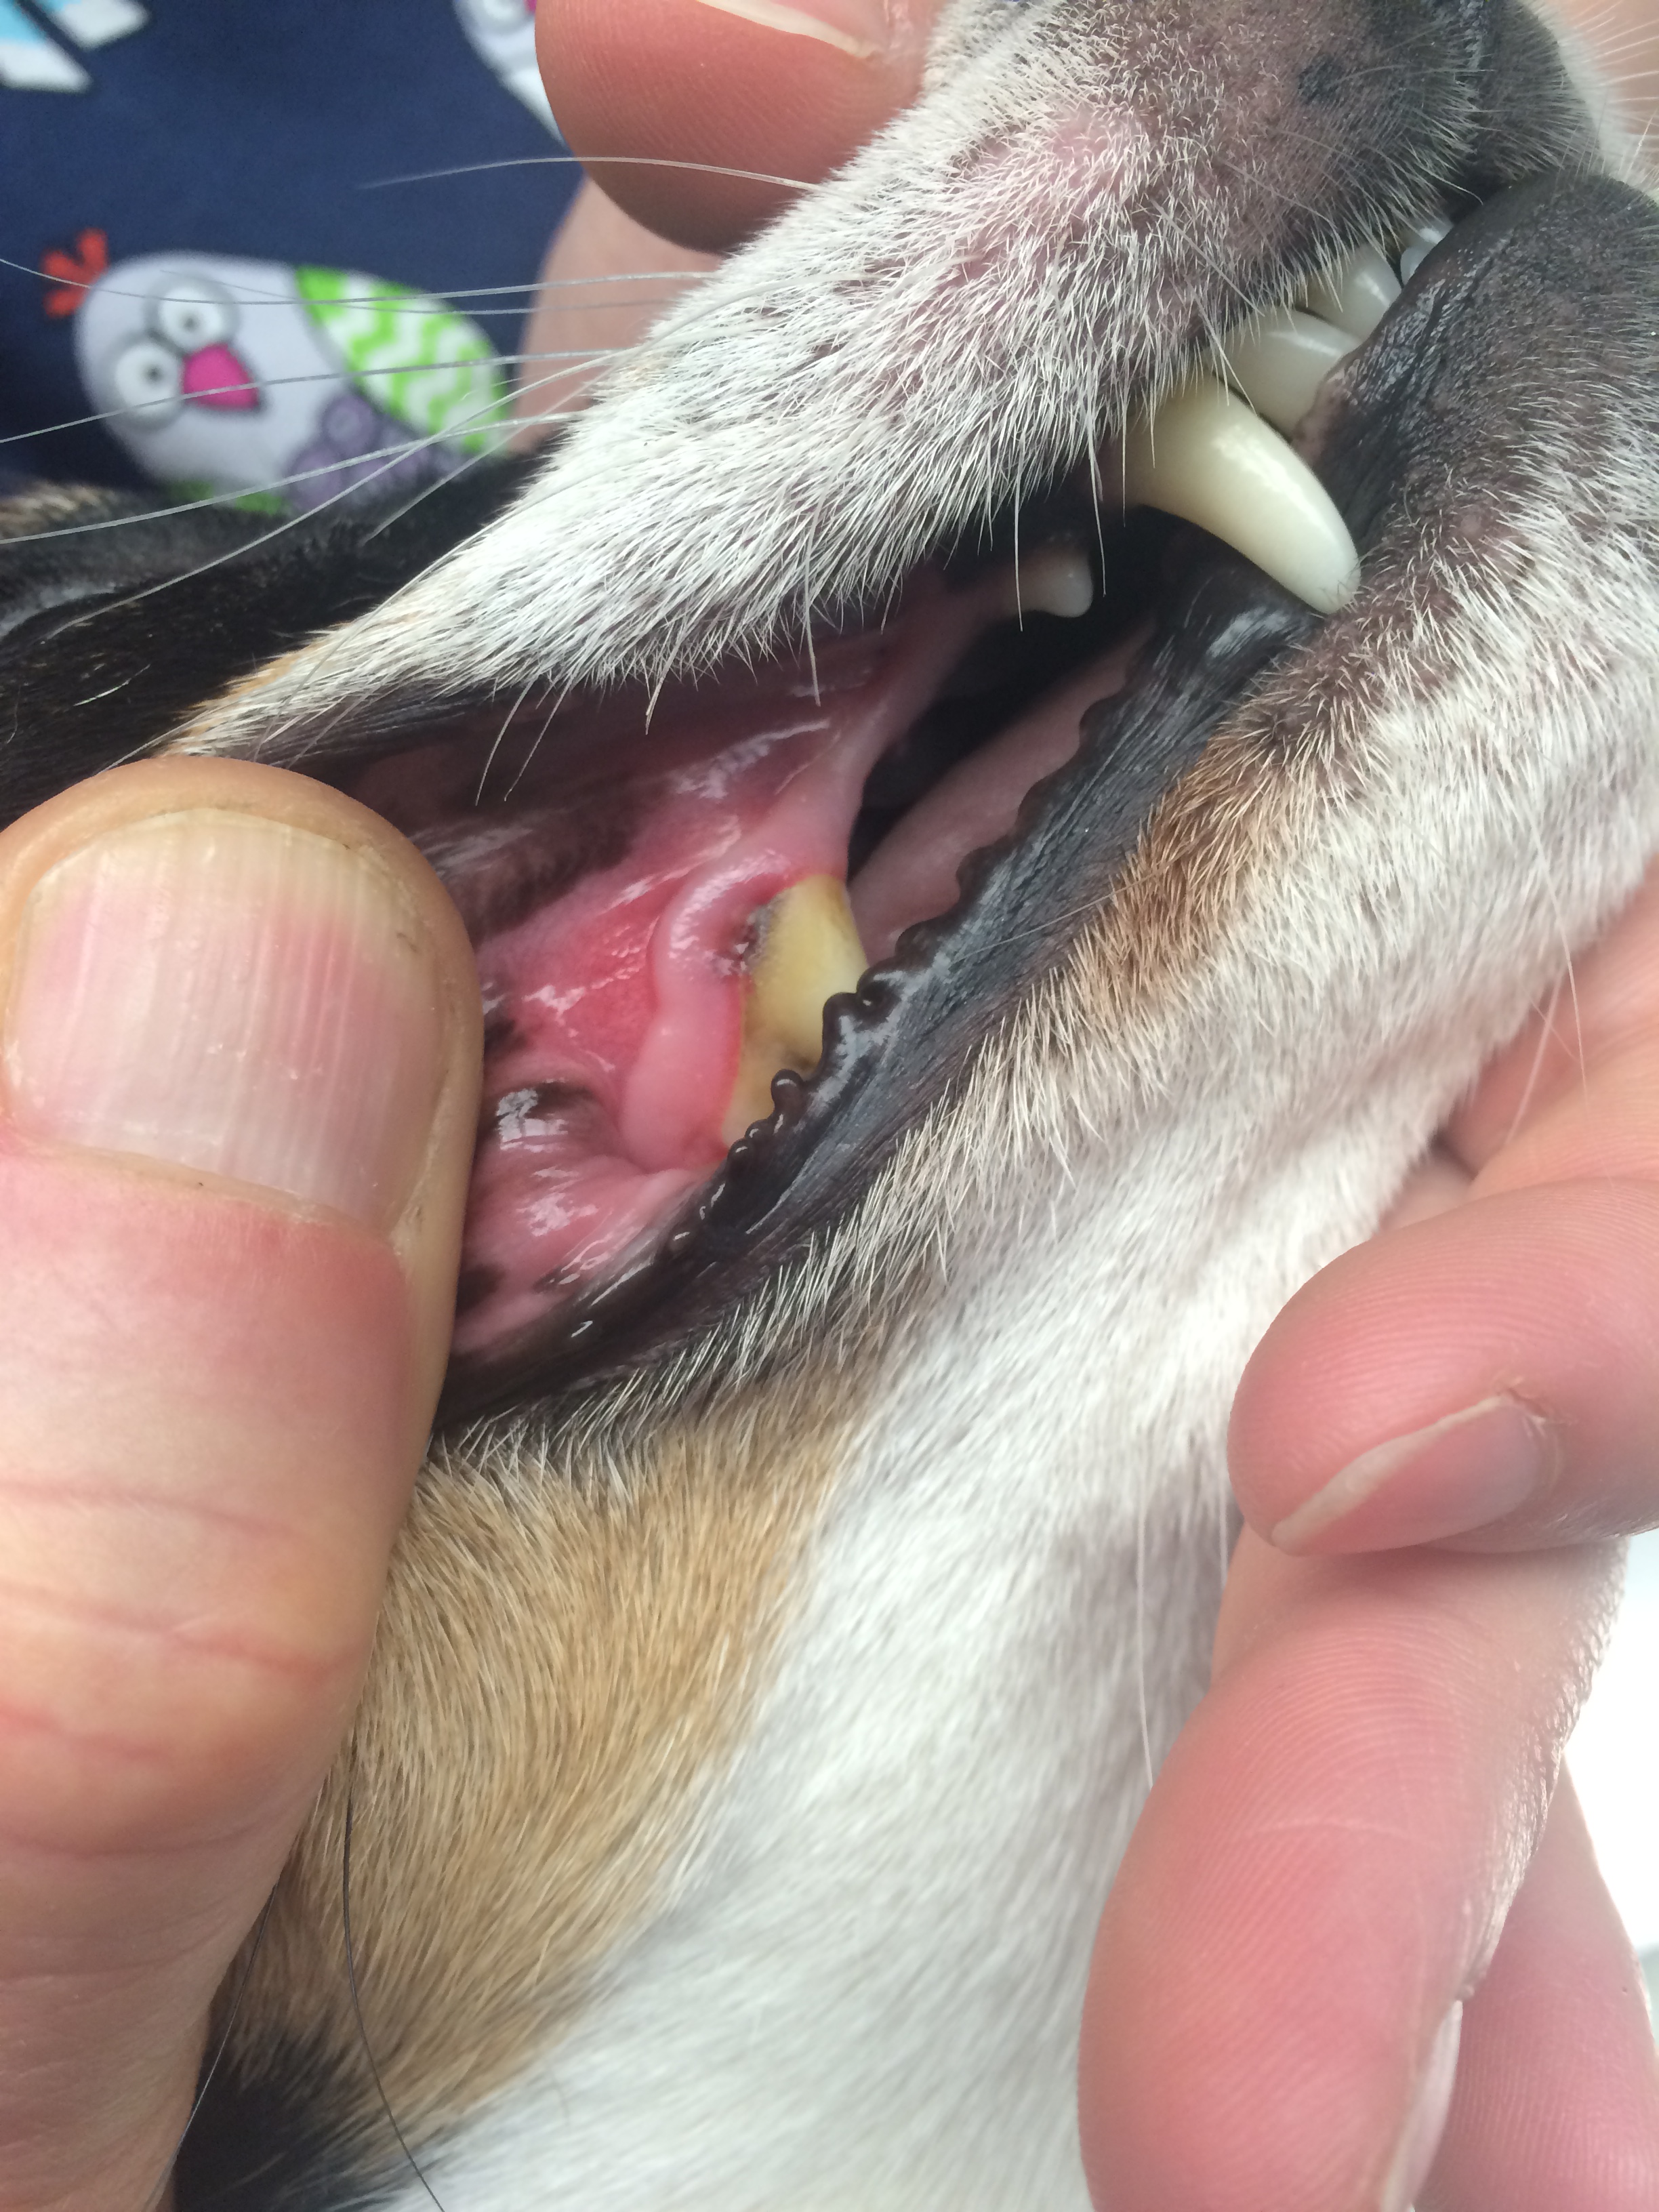 This gingivitis was associated with a sliver in the gum pocket.